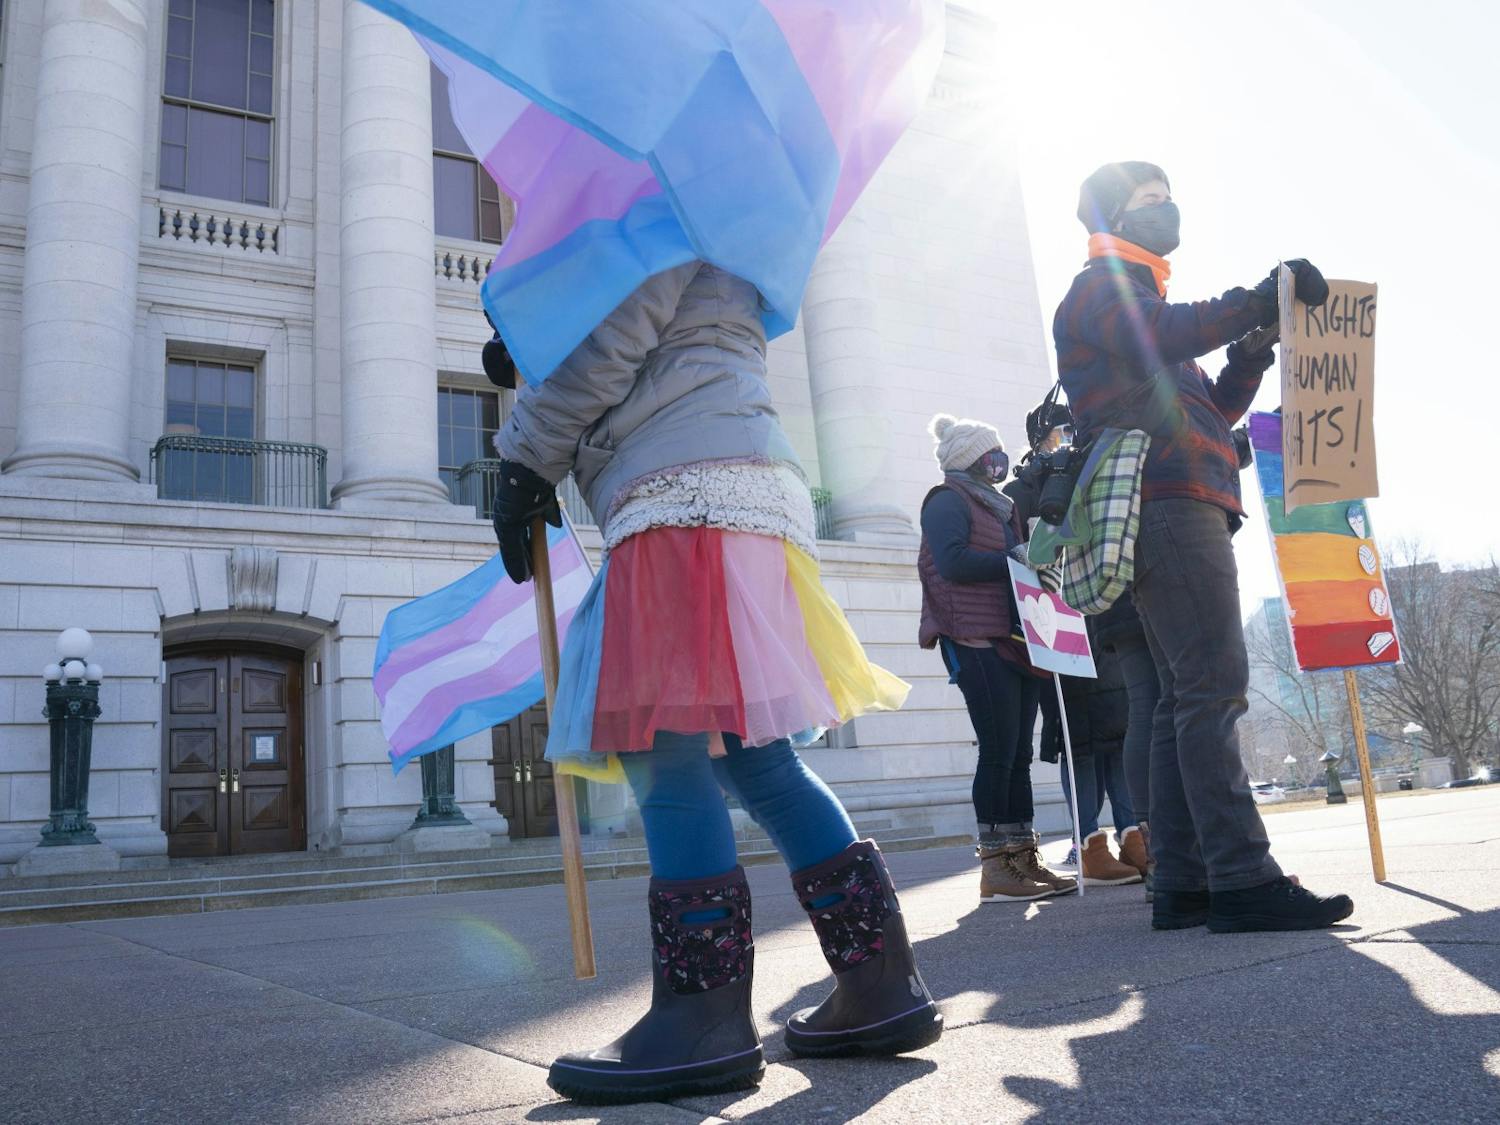 A rally held to support trans athletes.